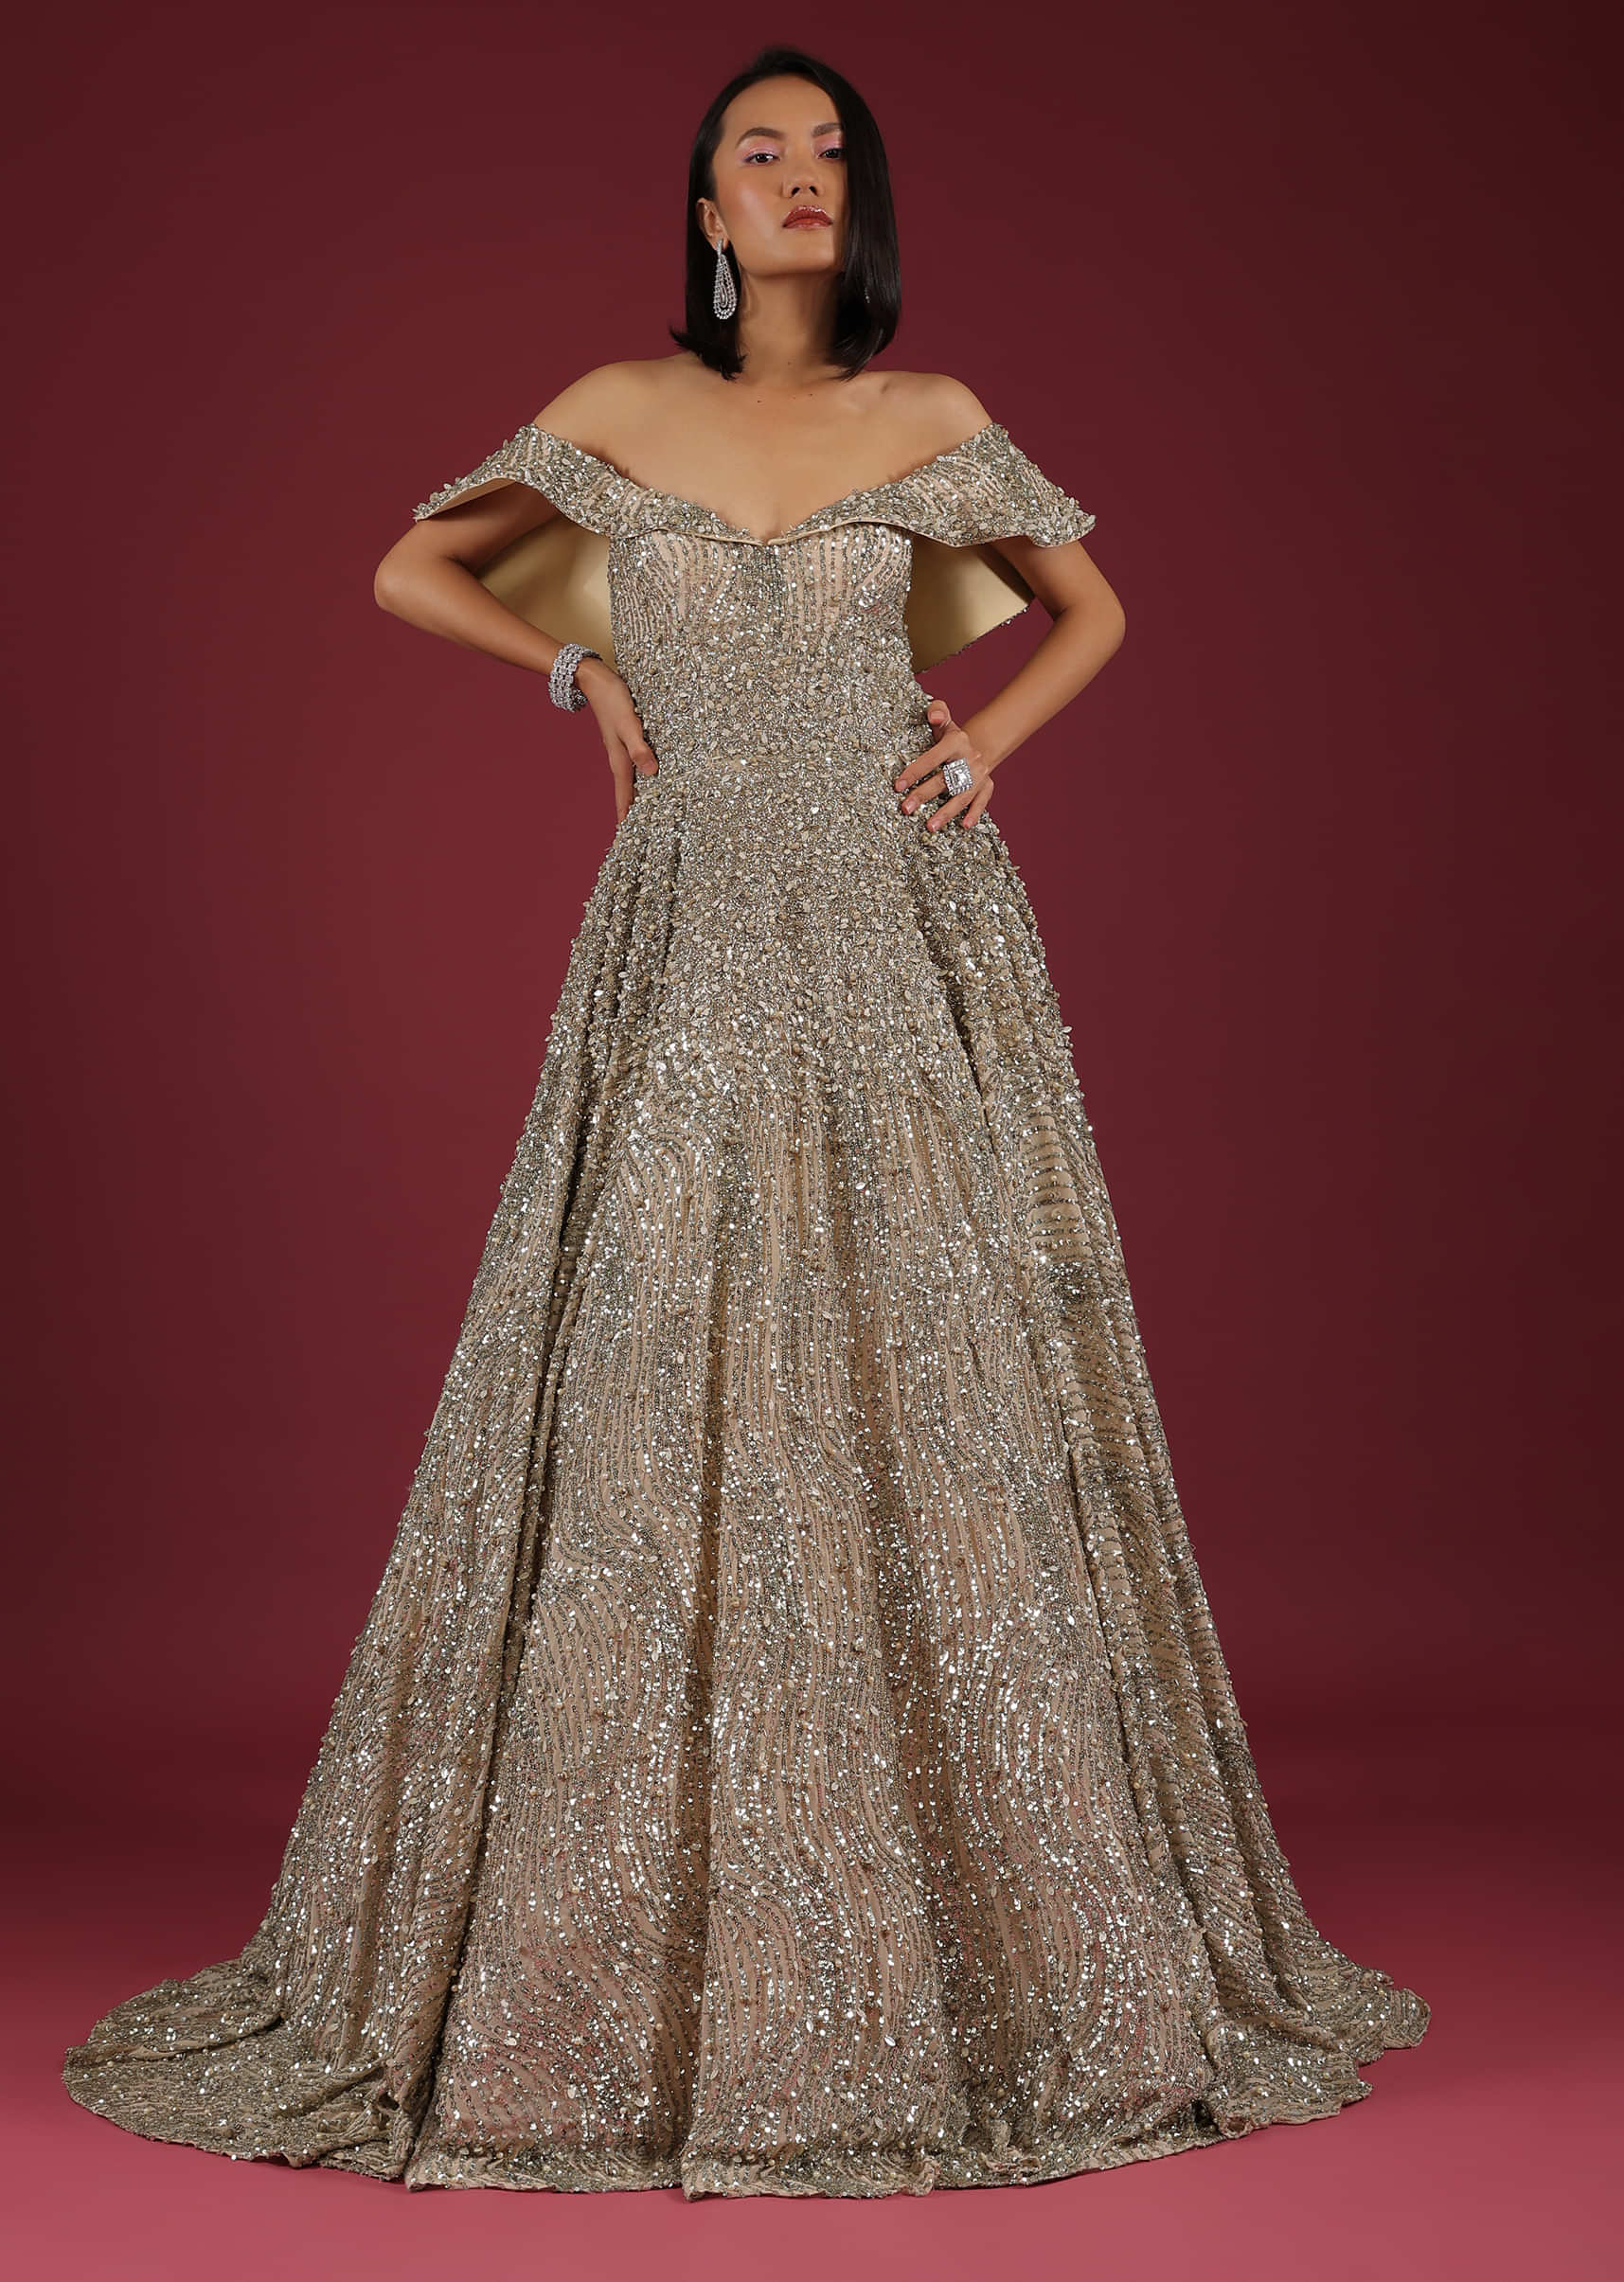 Net Oyster Gown With Layers, Embroidery Of 3D Petals And Moti, And A Cold Shoulder Neckline